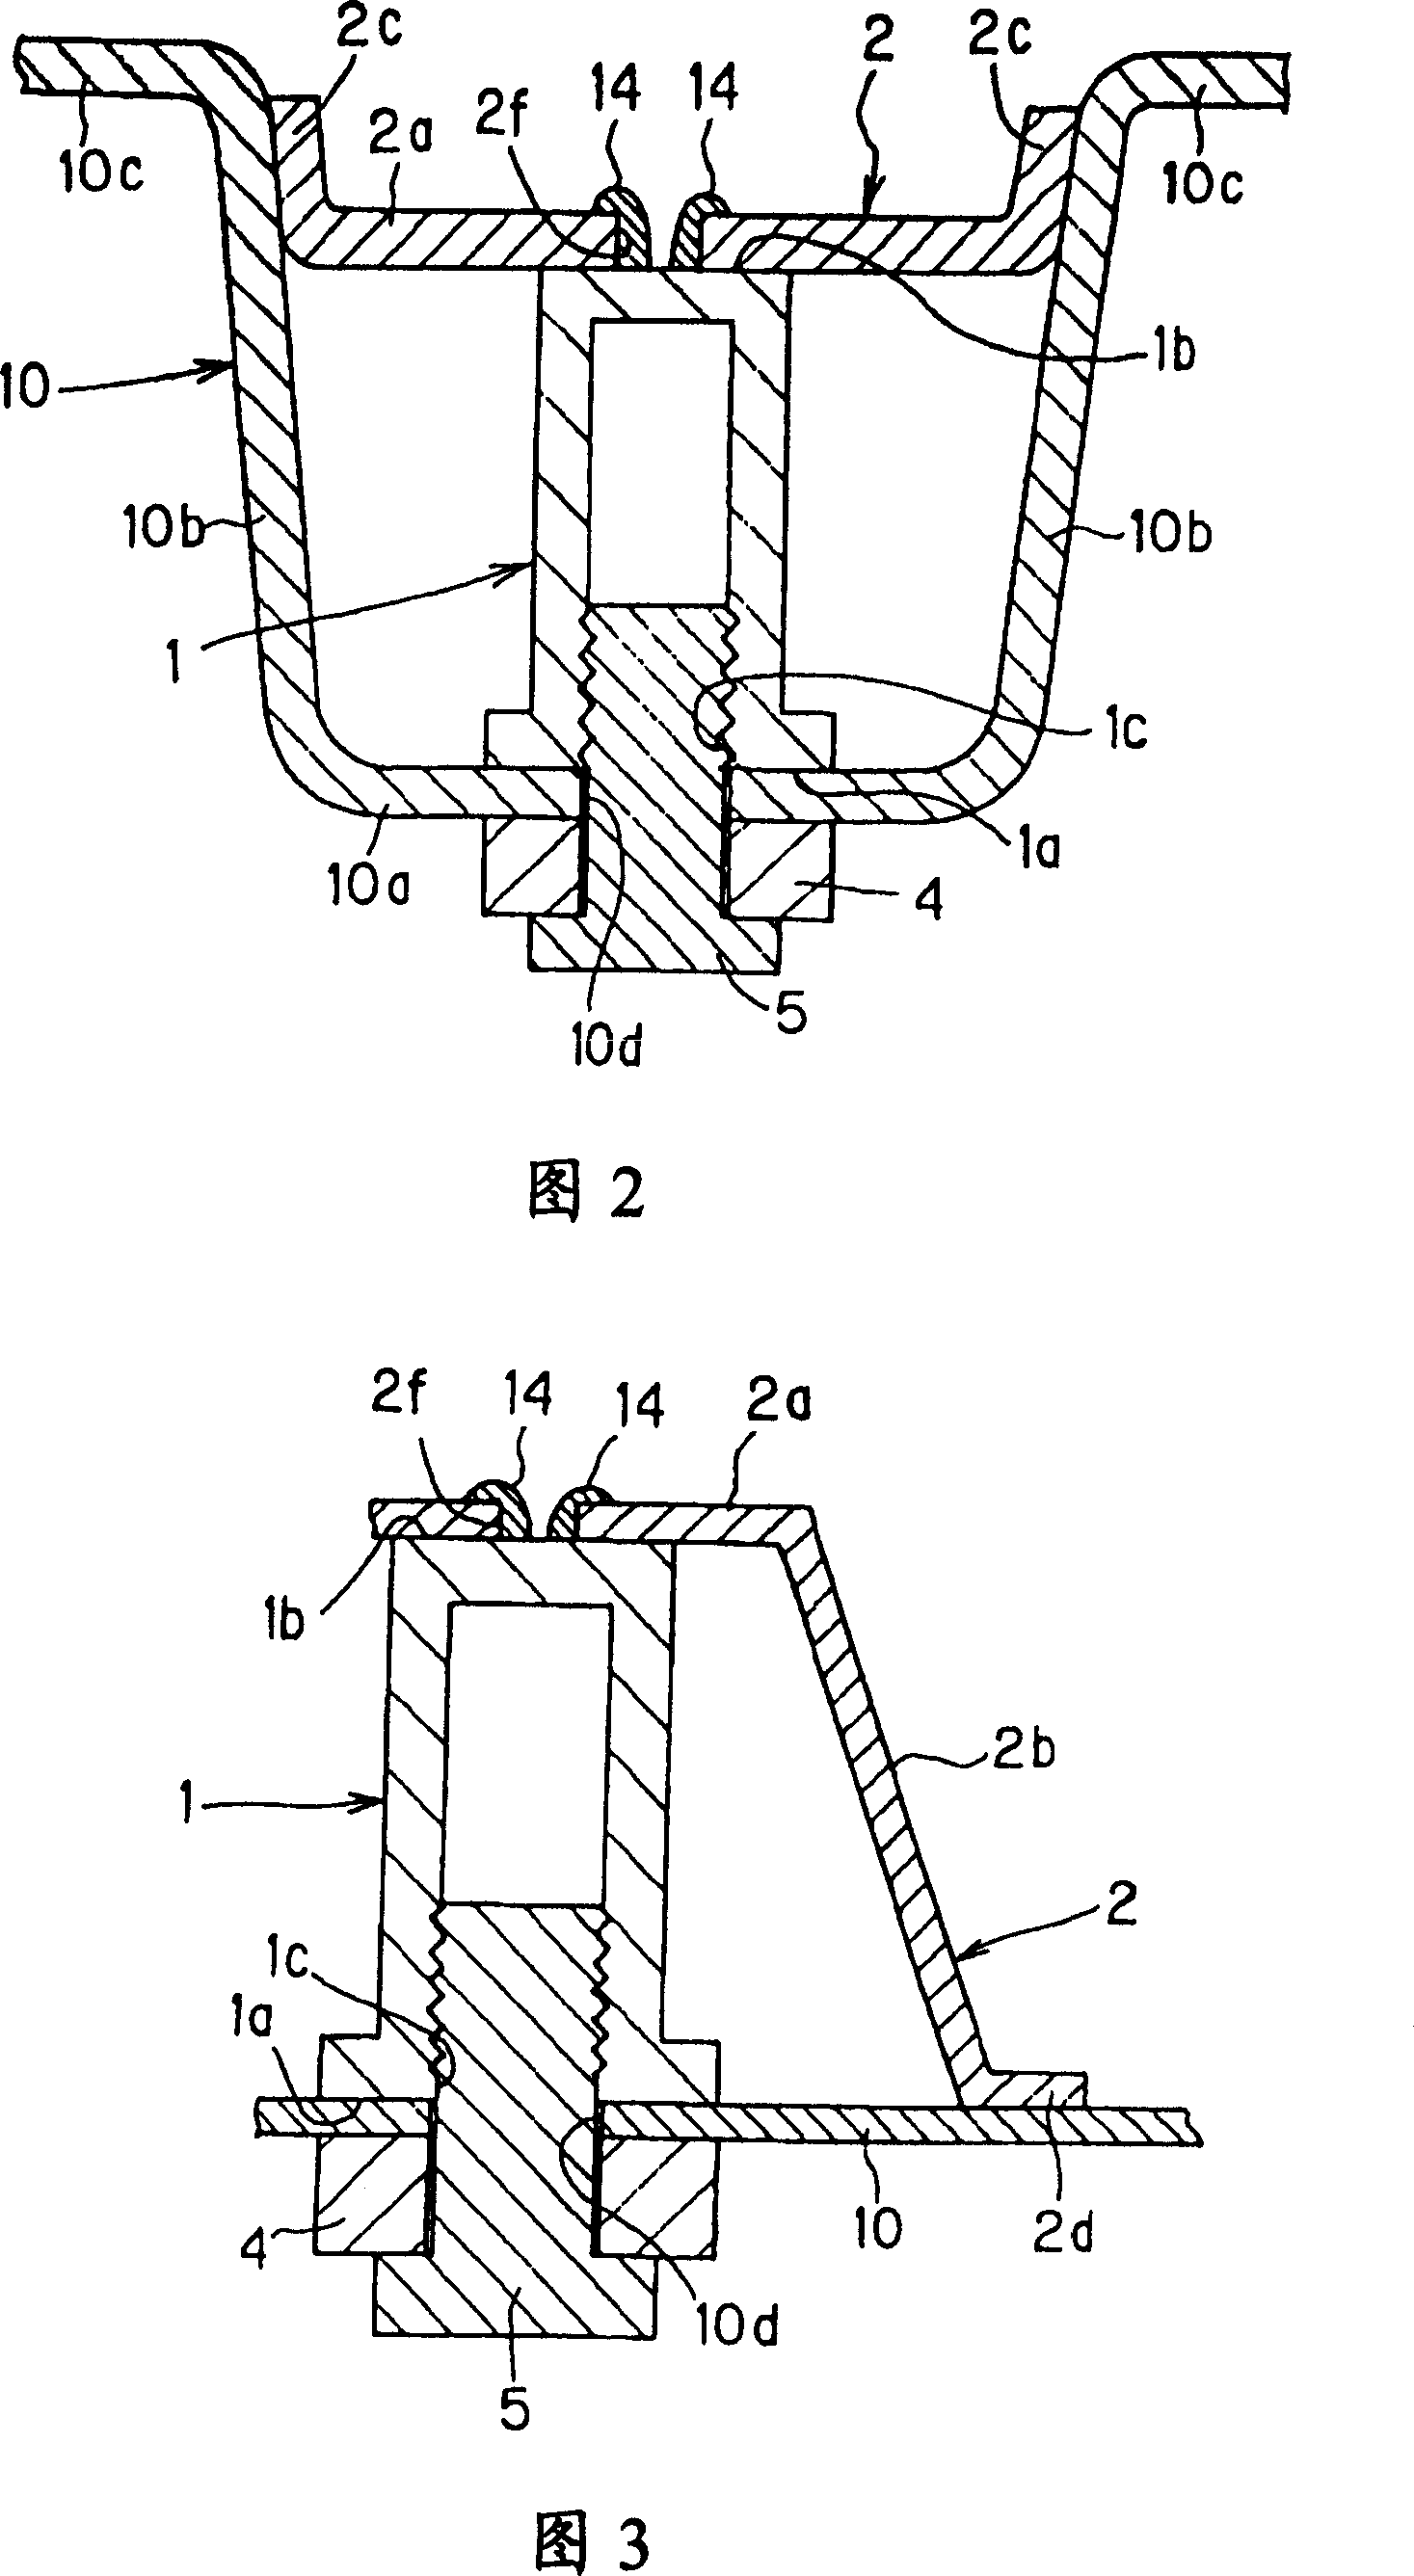 Pipe nut supporting structure